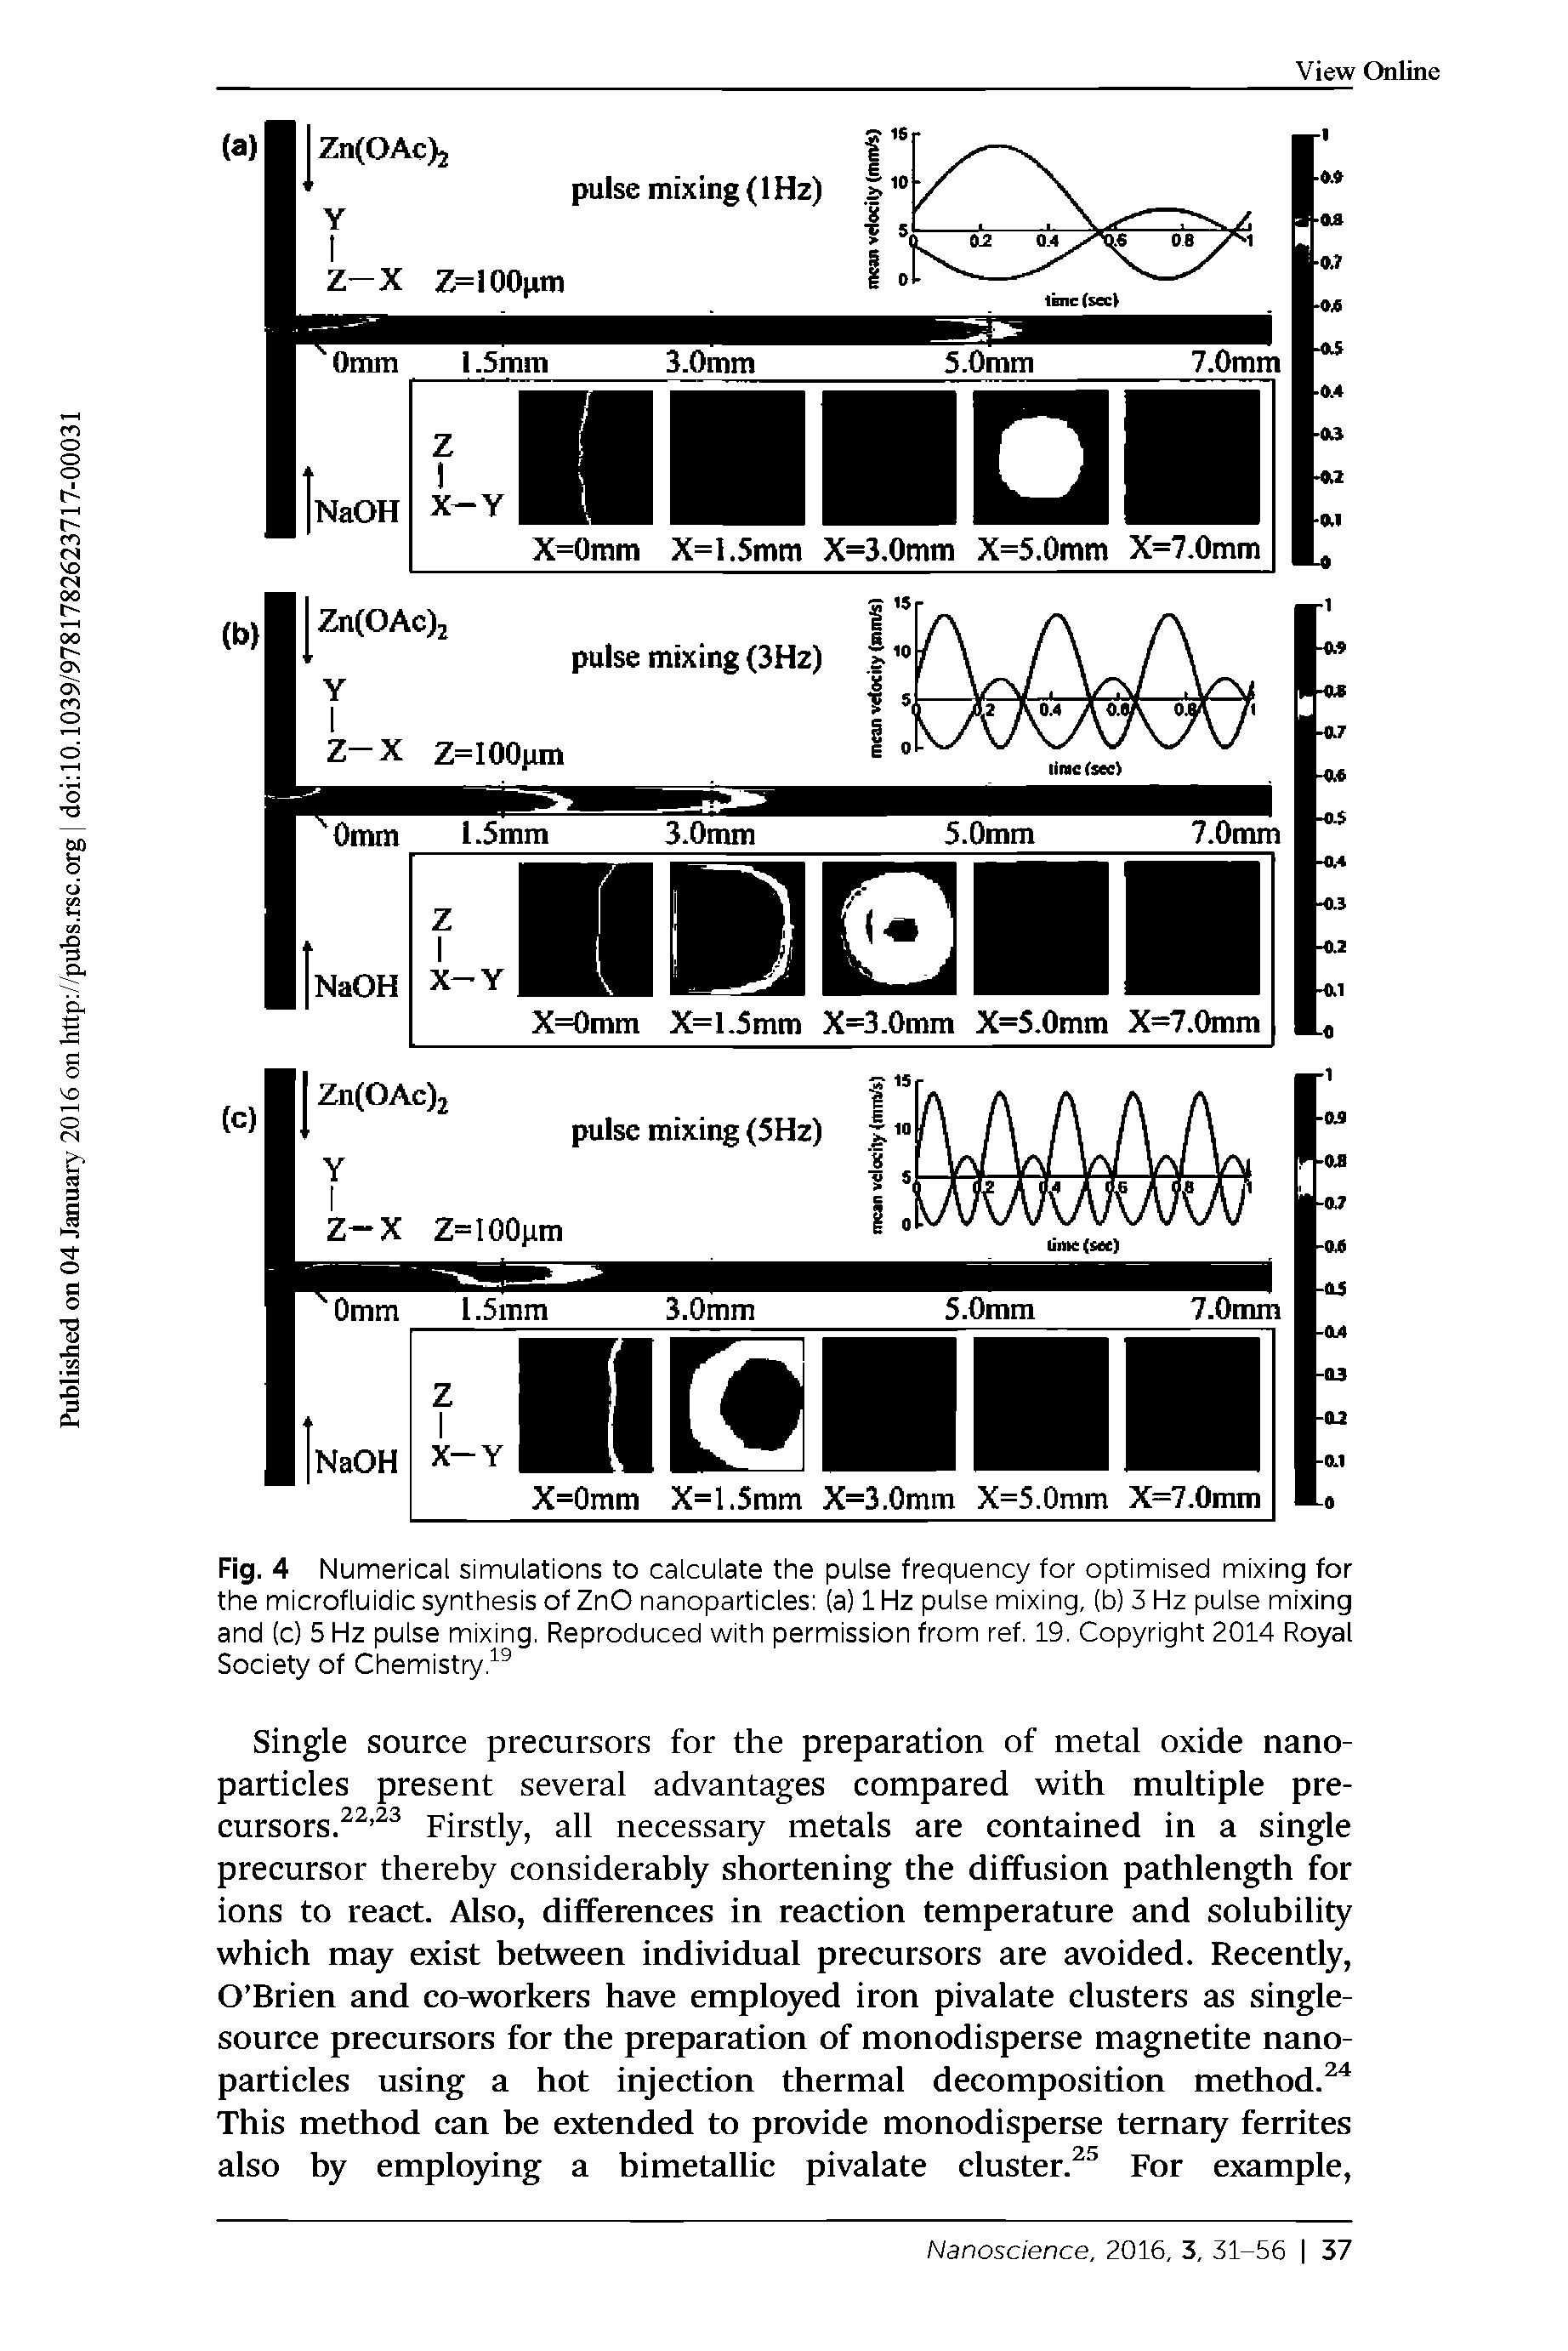 Fig. 4 Numerical simulations to calculate the pulse frequency for optimised mixing for the microfluidic synthesis of ZnO nanoparticles (a) 1 Hz pulse mixing, (b) 3 Hz pulse mixing and (c) 5 Hz pulse mixing. Reproduced with permission from ref. 19. Copyright 2014 Royal Society of Chemistry...